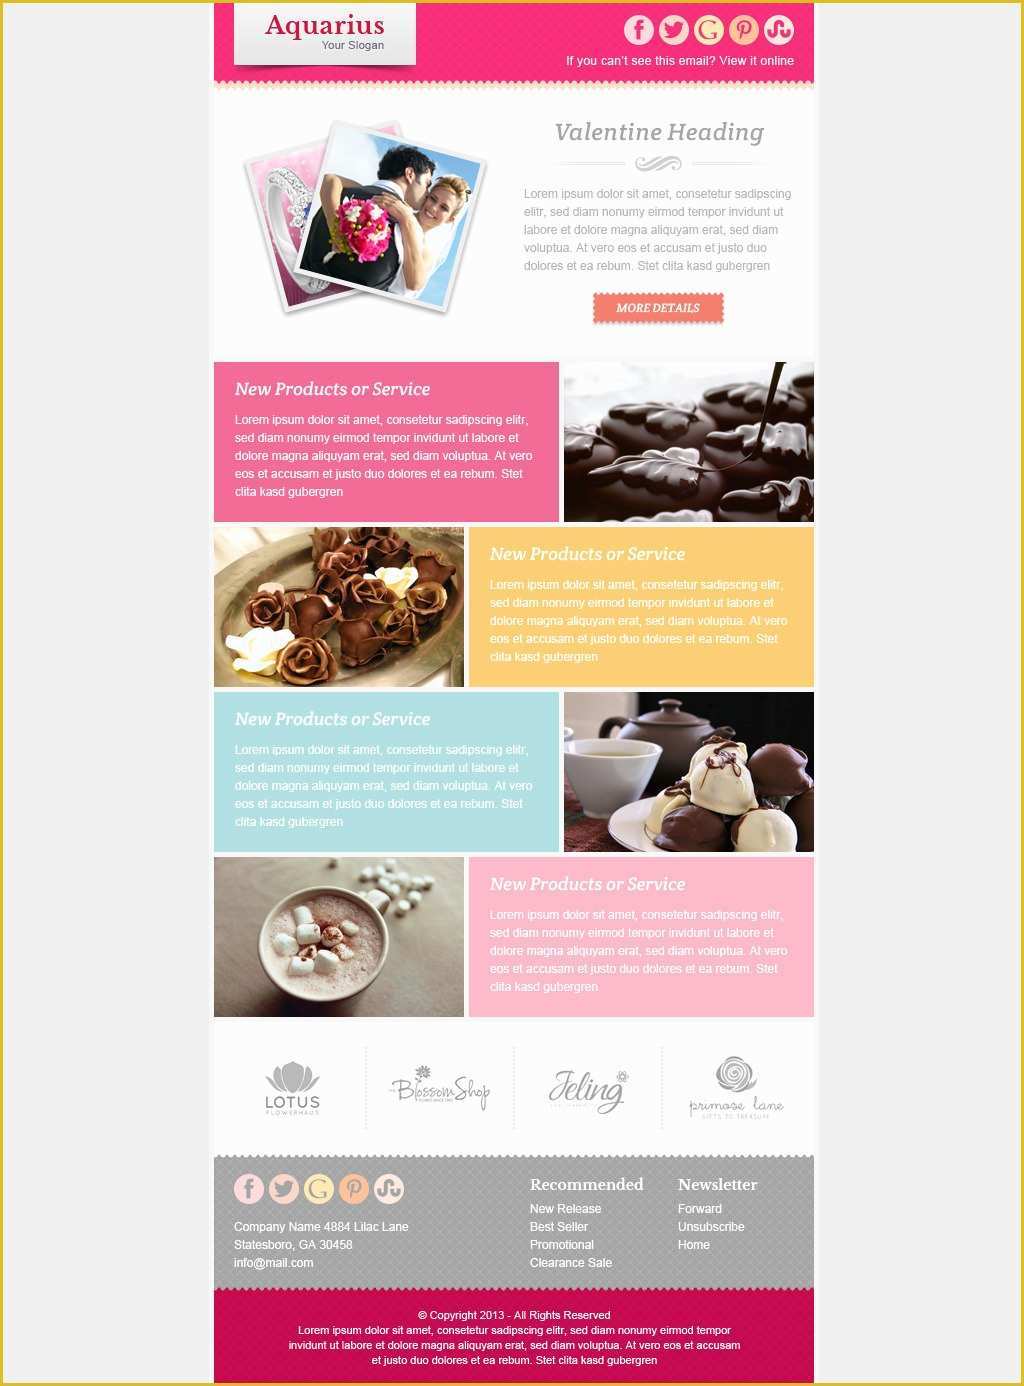 Free Newsletter Templates for Email Marketing Of Valentine Email Marketing & Newsletter Template by